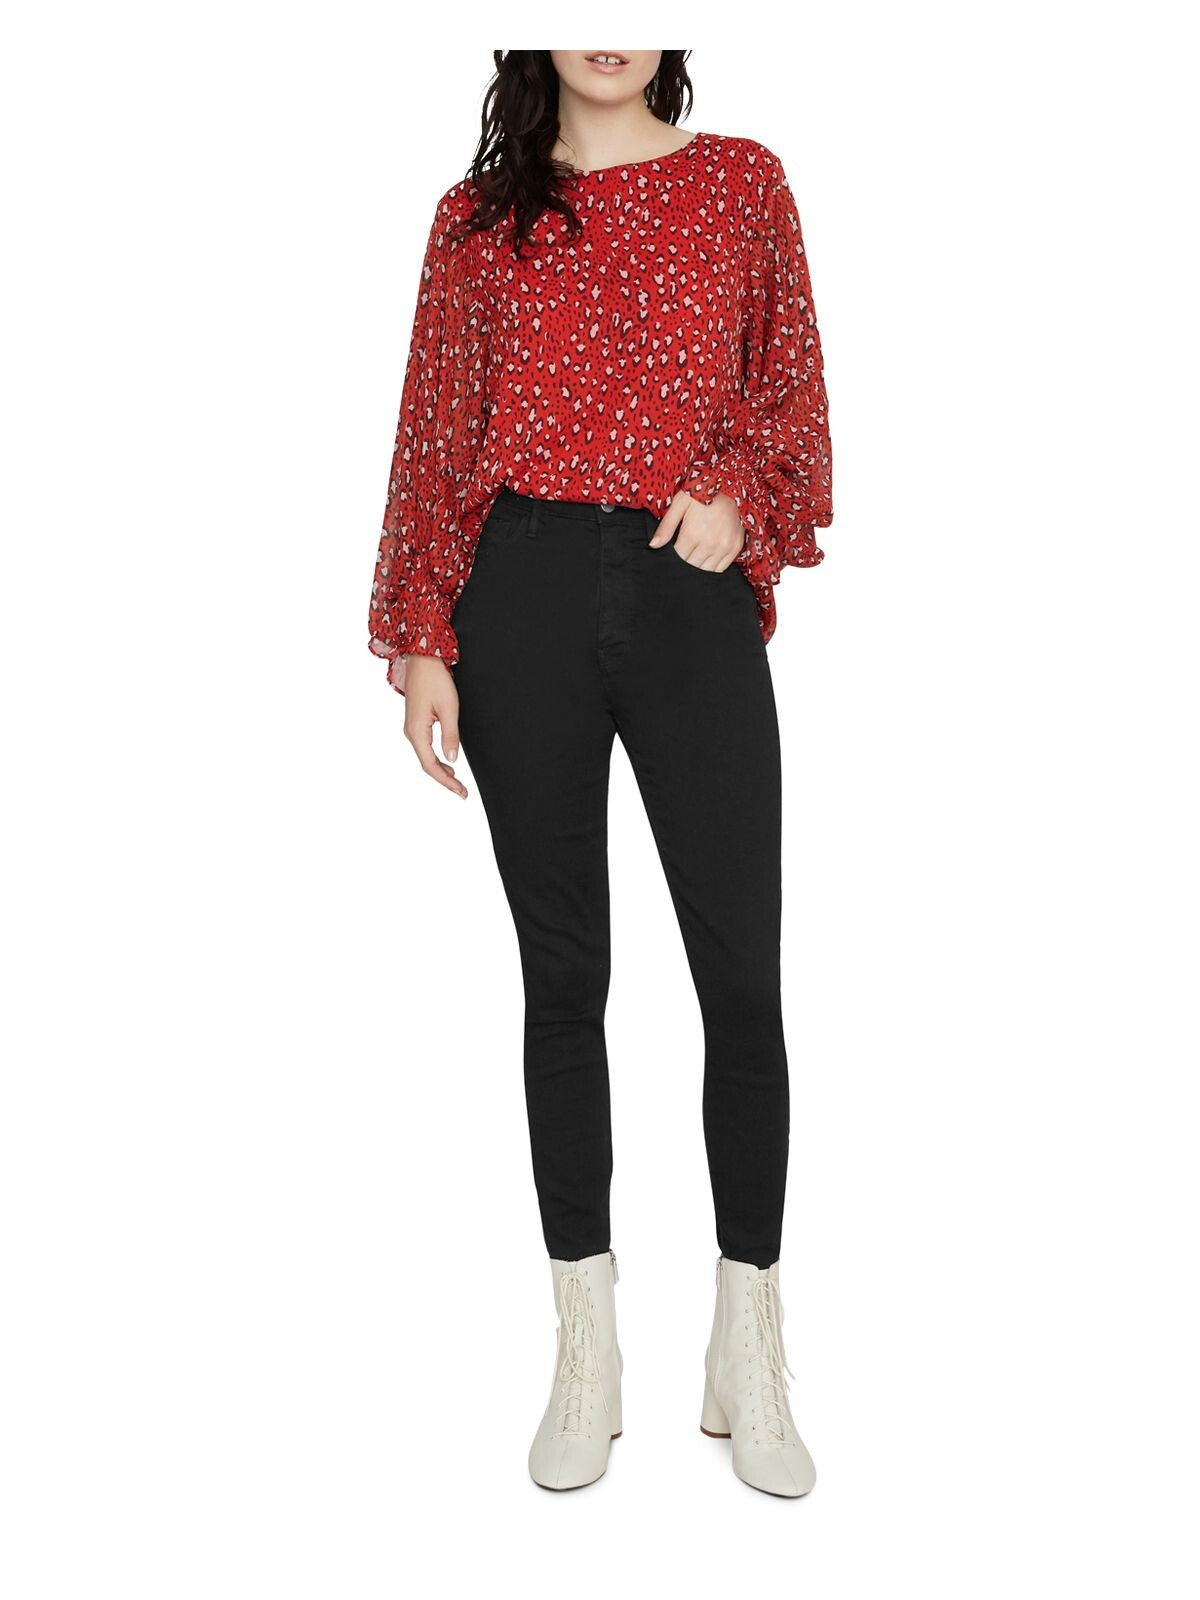 SANCTUARY Womens Red Animal Print Long Sleeve Scoop Neck Wear To Work Blouse Juniors S